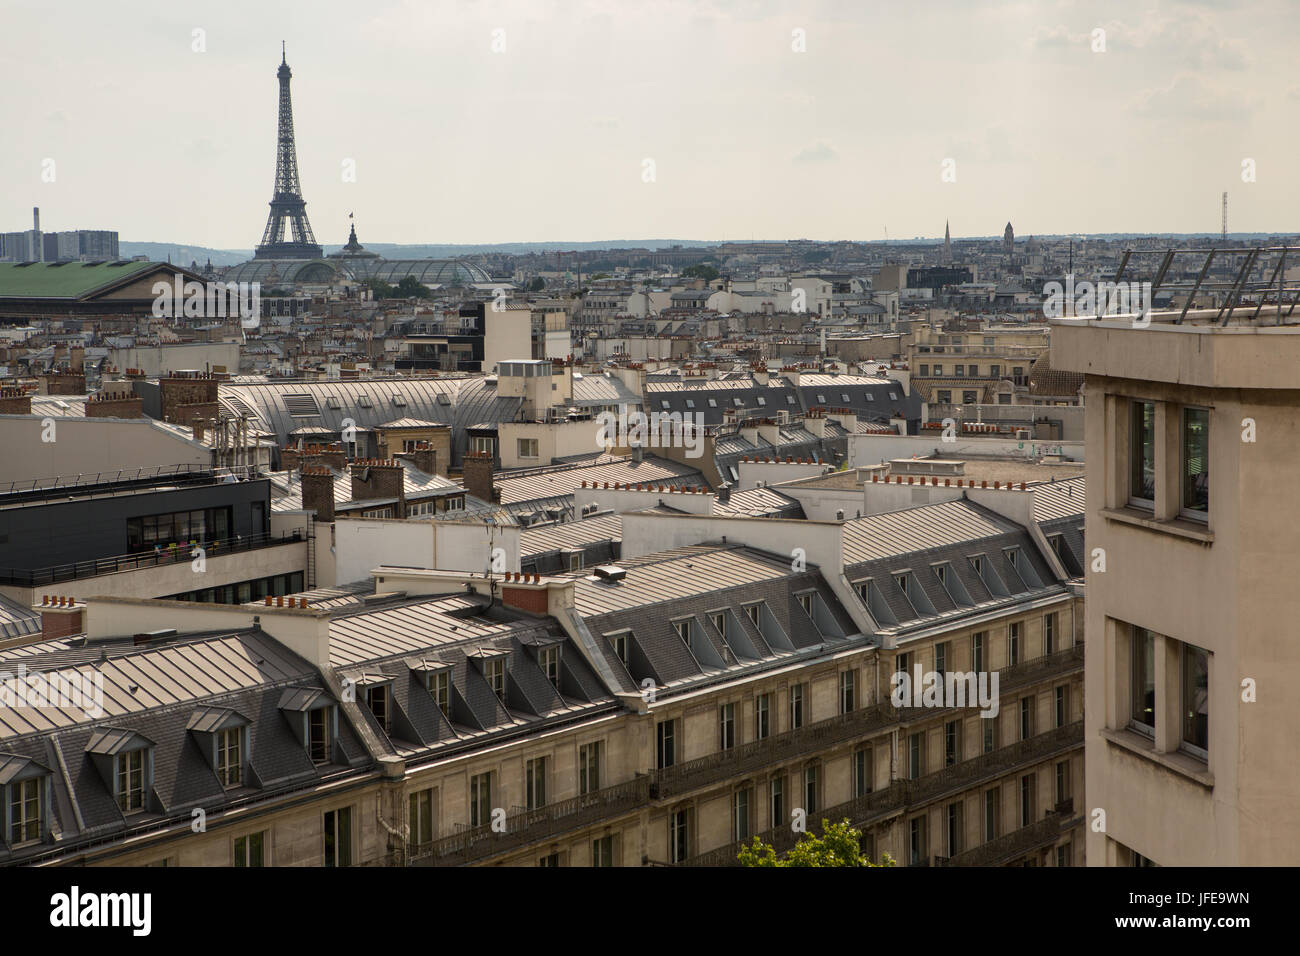 The Eiffel Tower towers above the Paris cityscape. Stock Photo